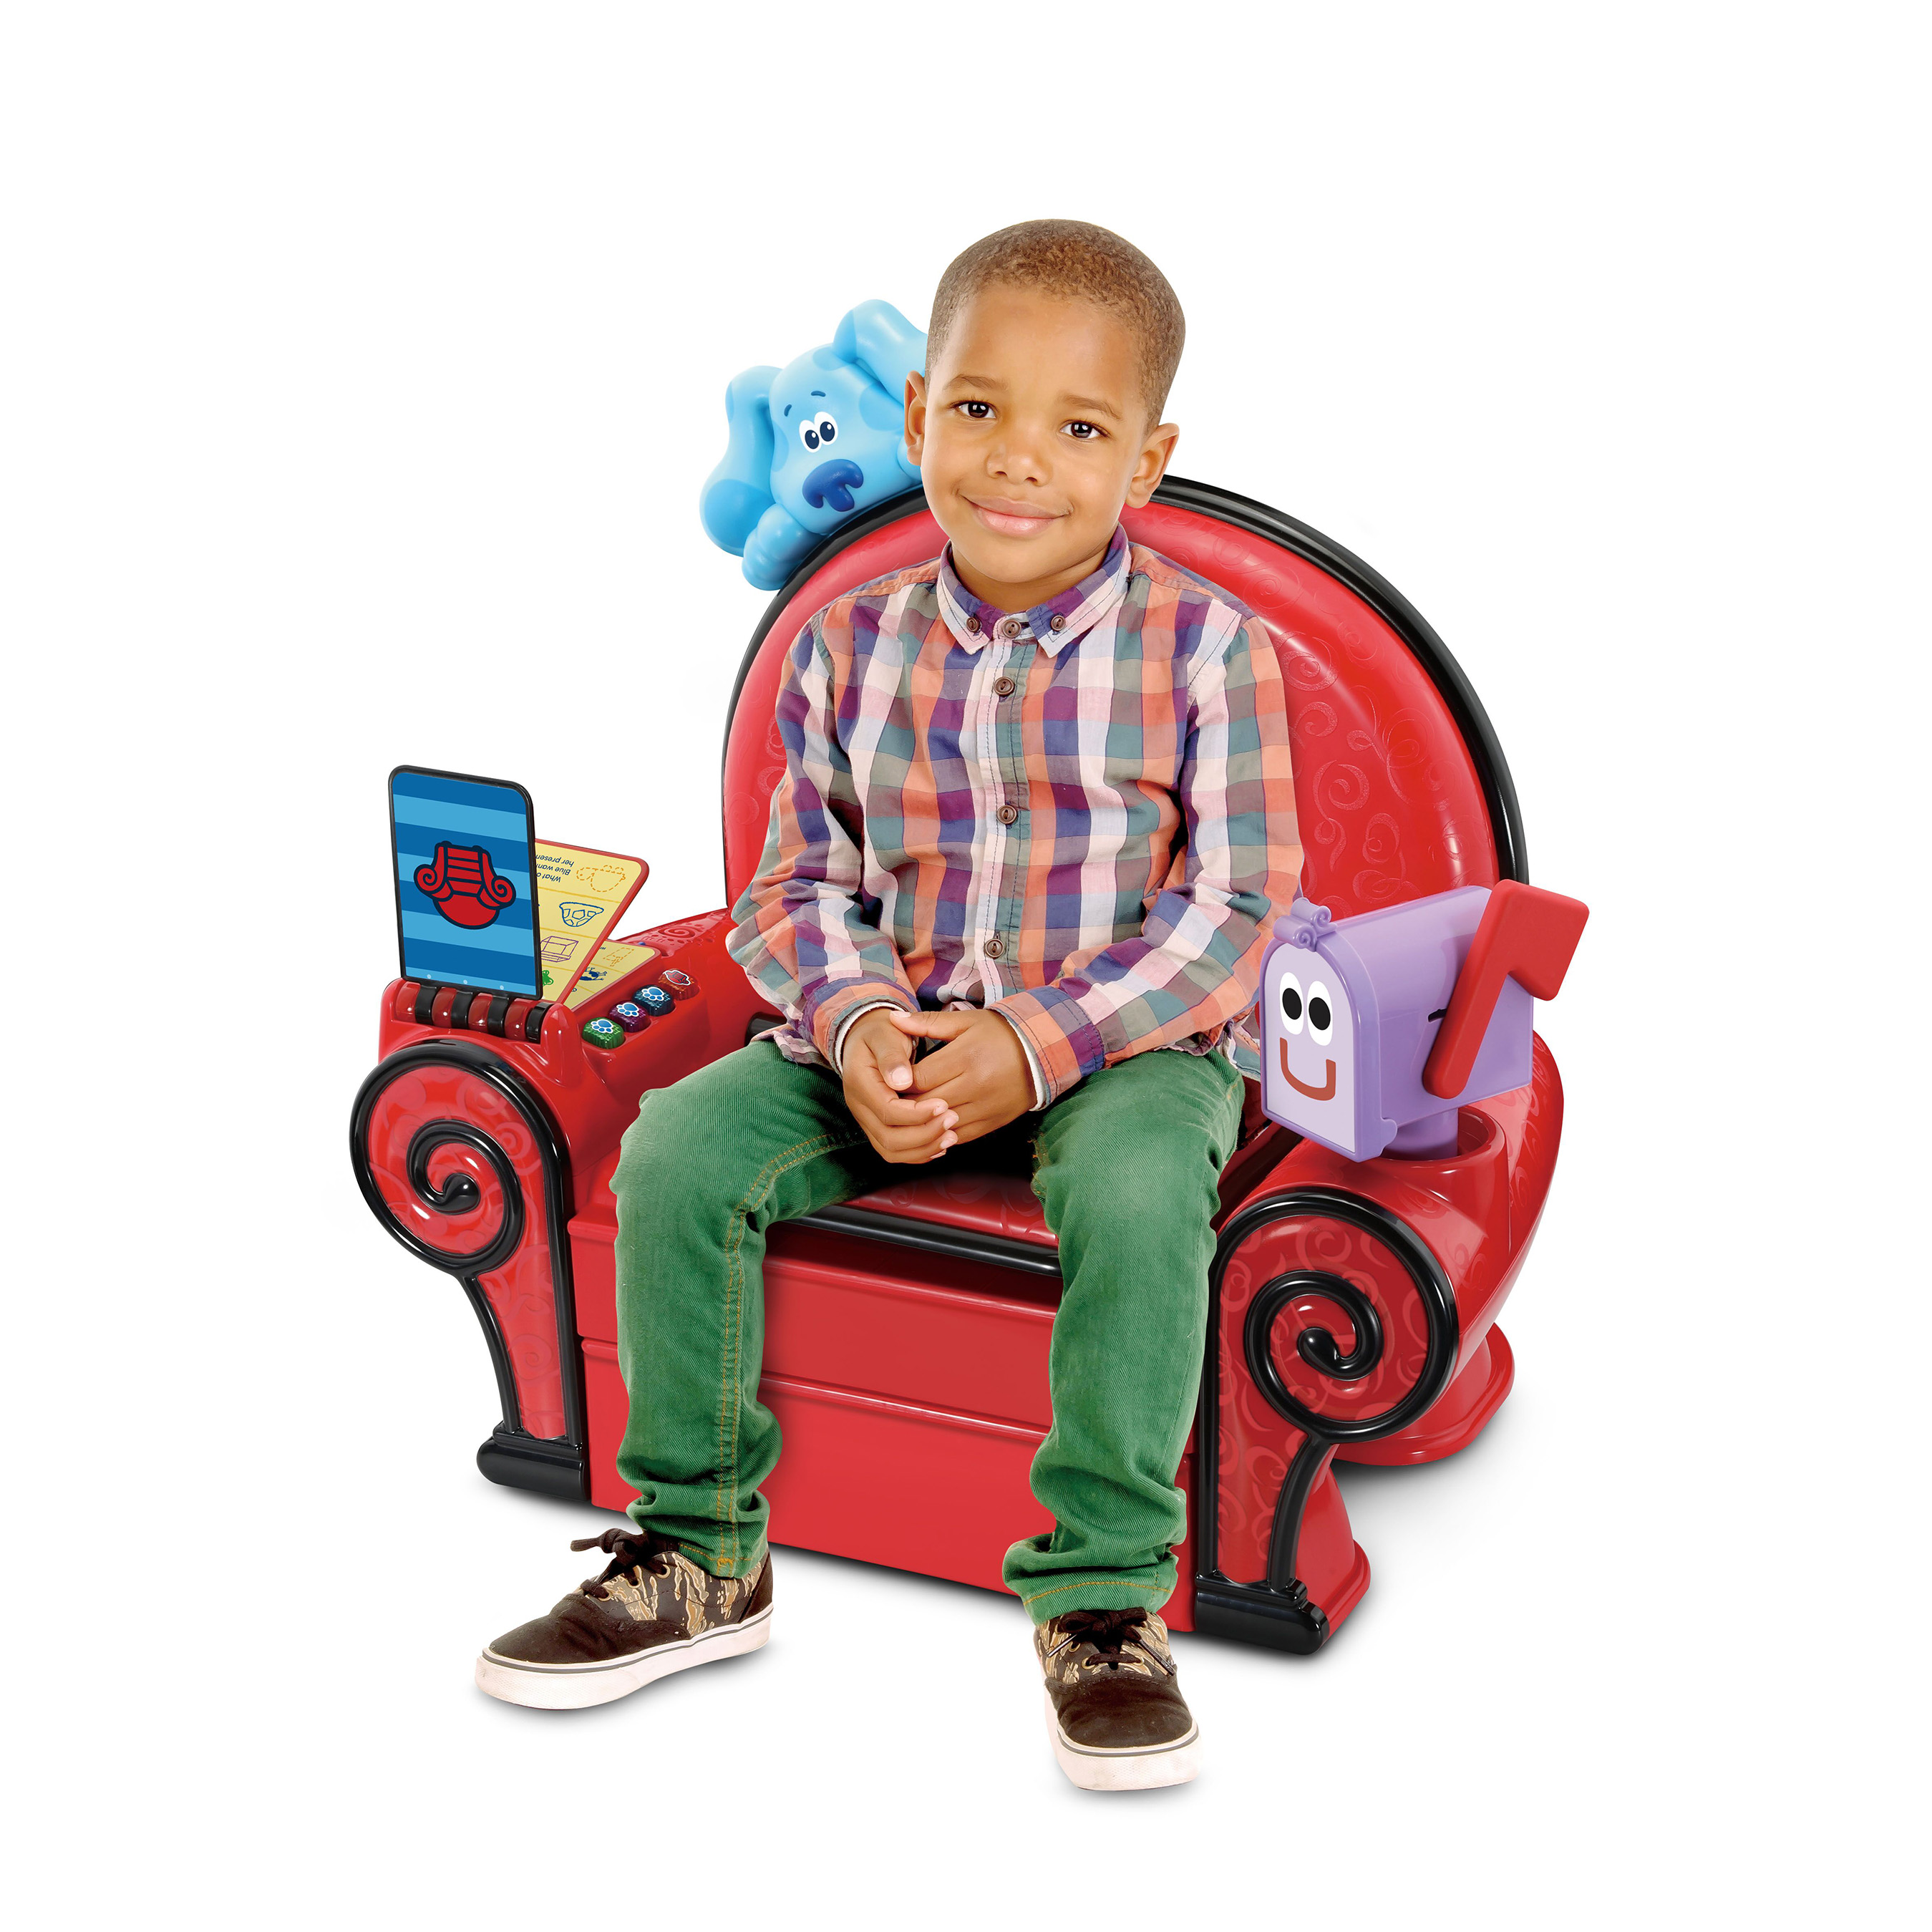 New Blue's Clues & You! Play & Learn Thinking Chair from LeapFrog is available now.